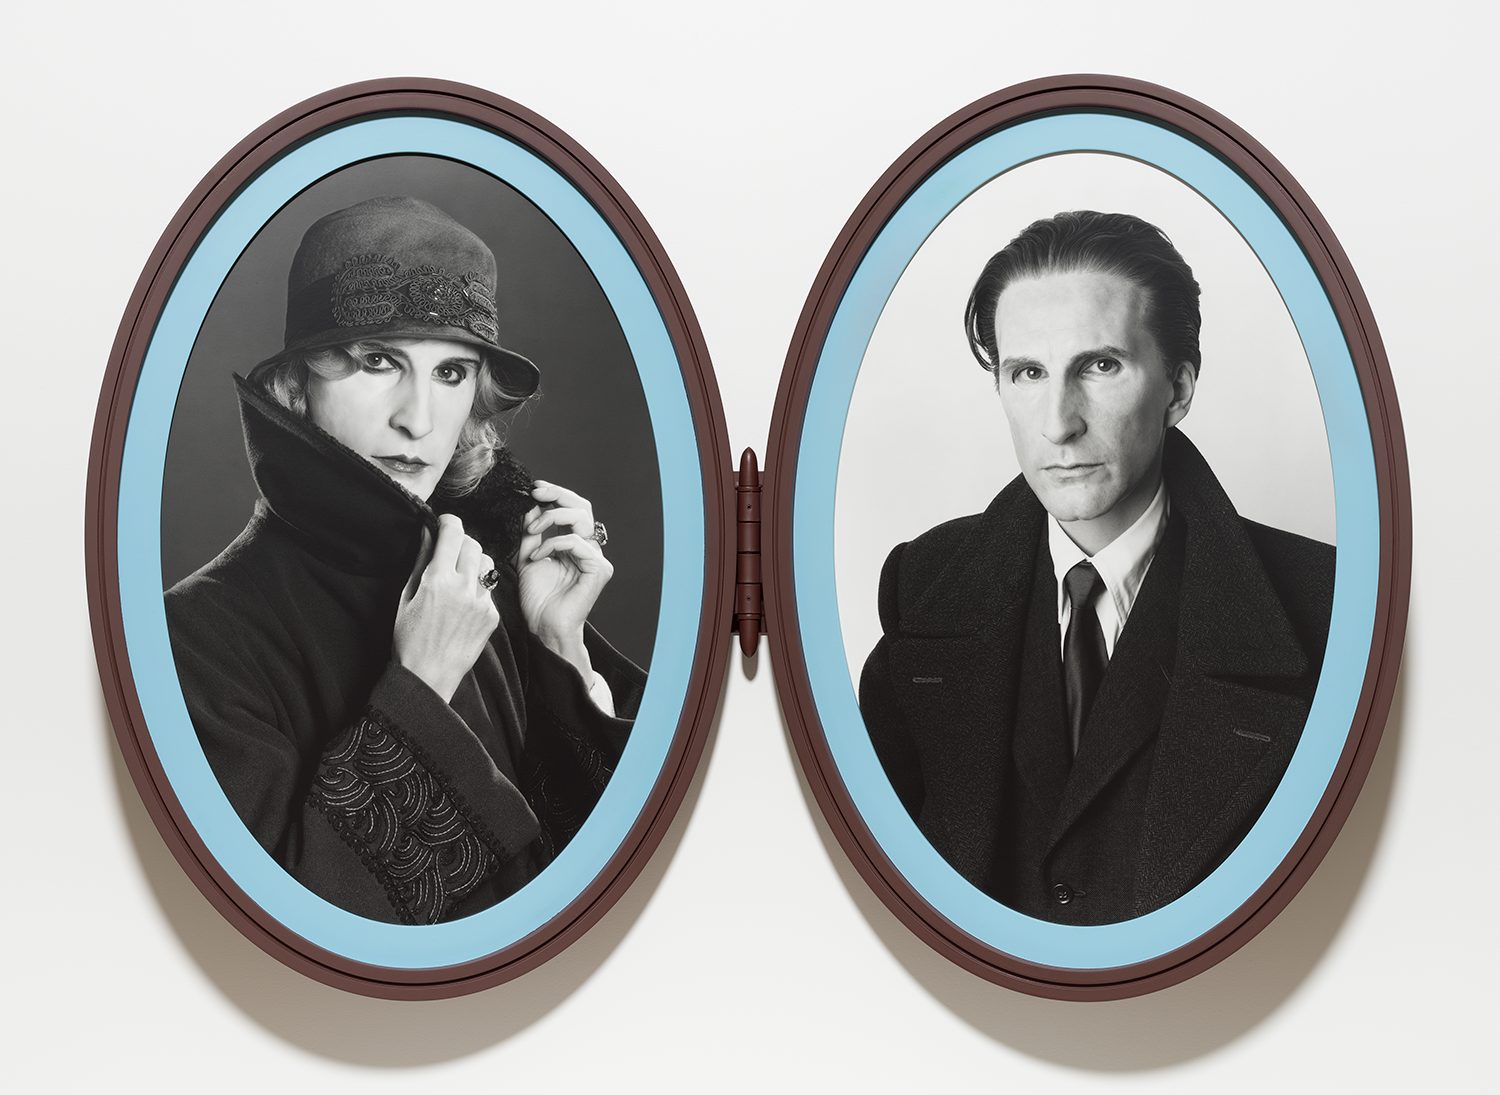 Gillian Wearing (b. 1963, Britain), Me as Madame and Monsieur Duchamp, 2018, bromide prints in articulated frame. Â© Gillian Wearing, Courtesy of the artist, Maureen Paley, London, Tanya Bonakdar Gallery, New York / Los Angeles, and Regen Projects, Los Angeles